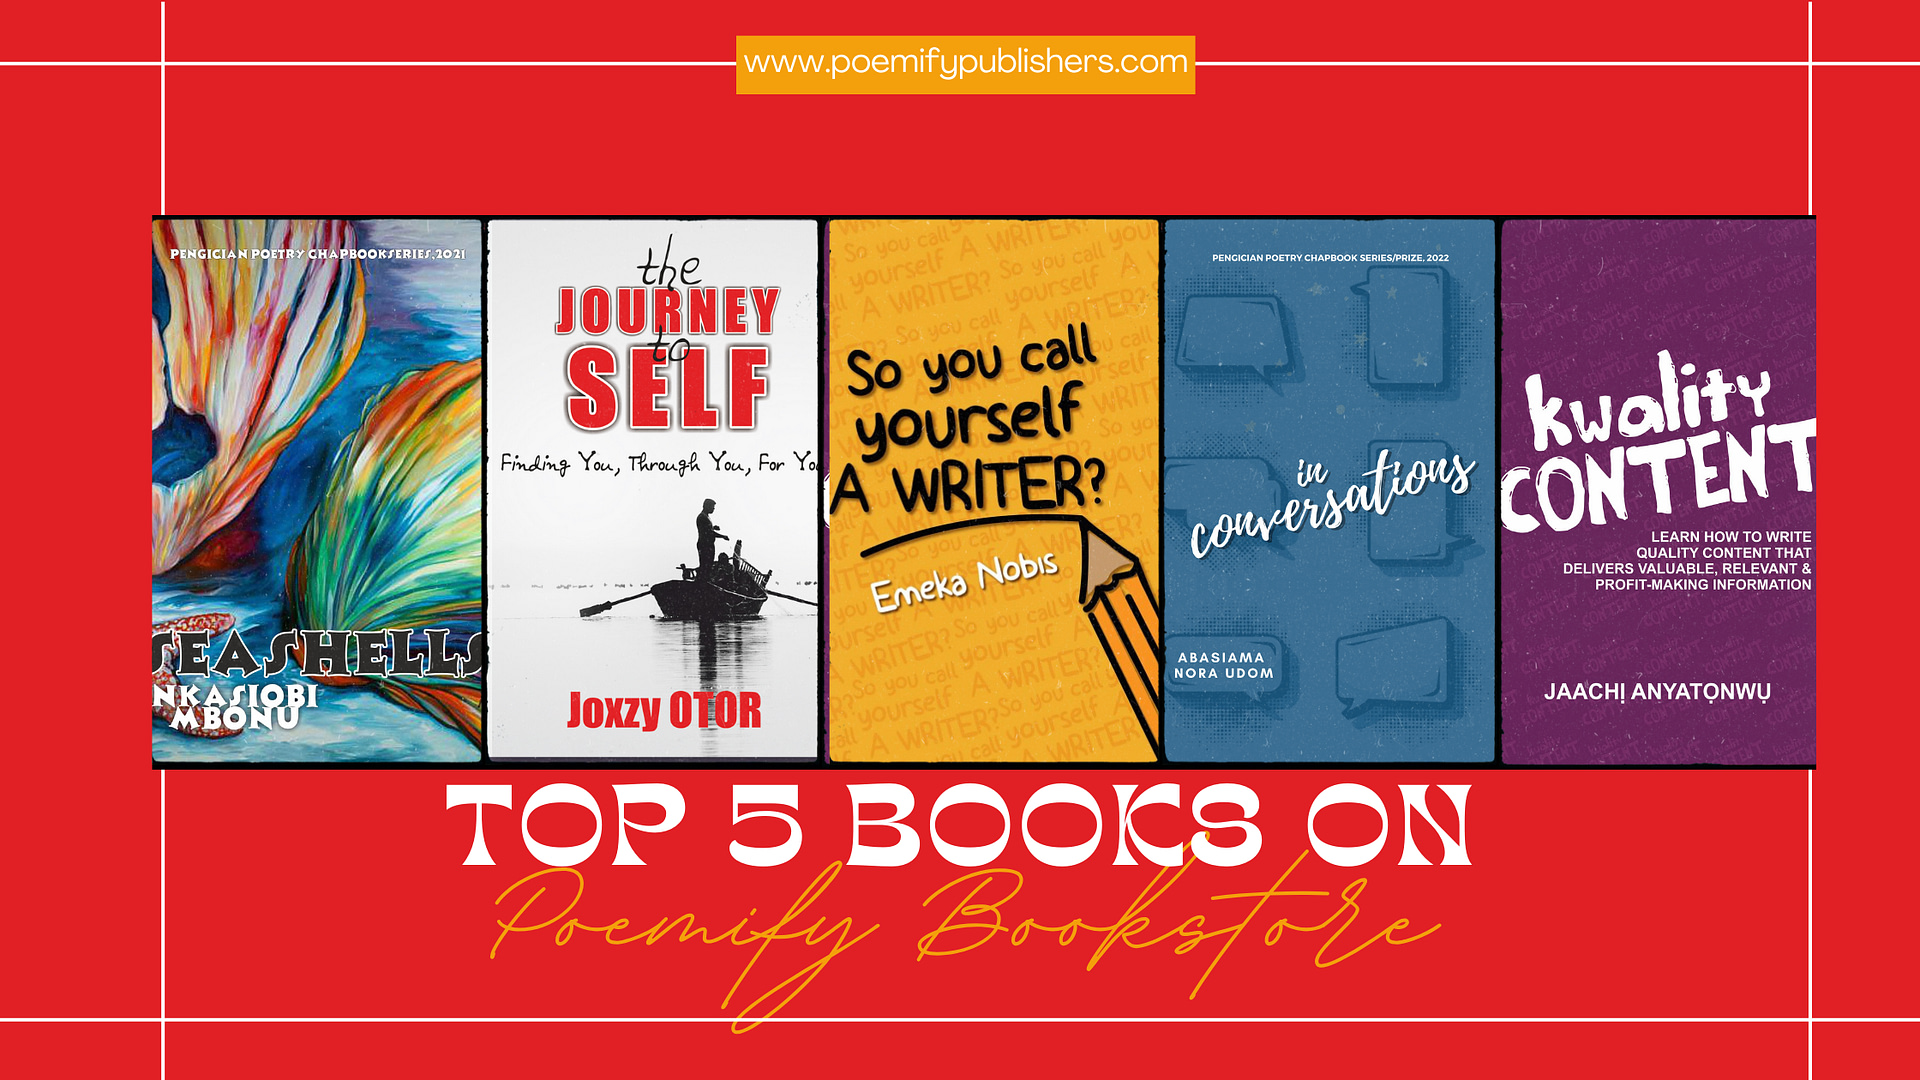 TOP 5 BOOKS ON POEMIFY BOOKSTORE